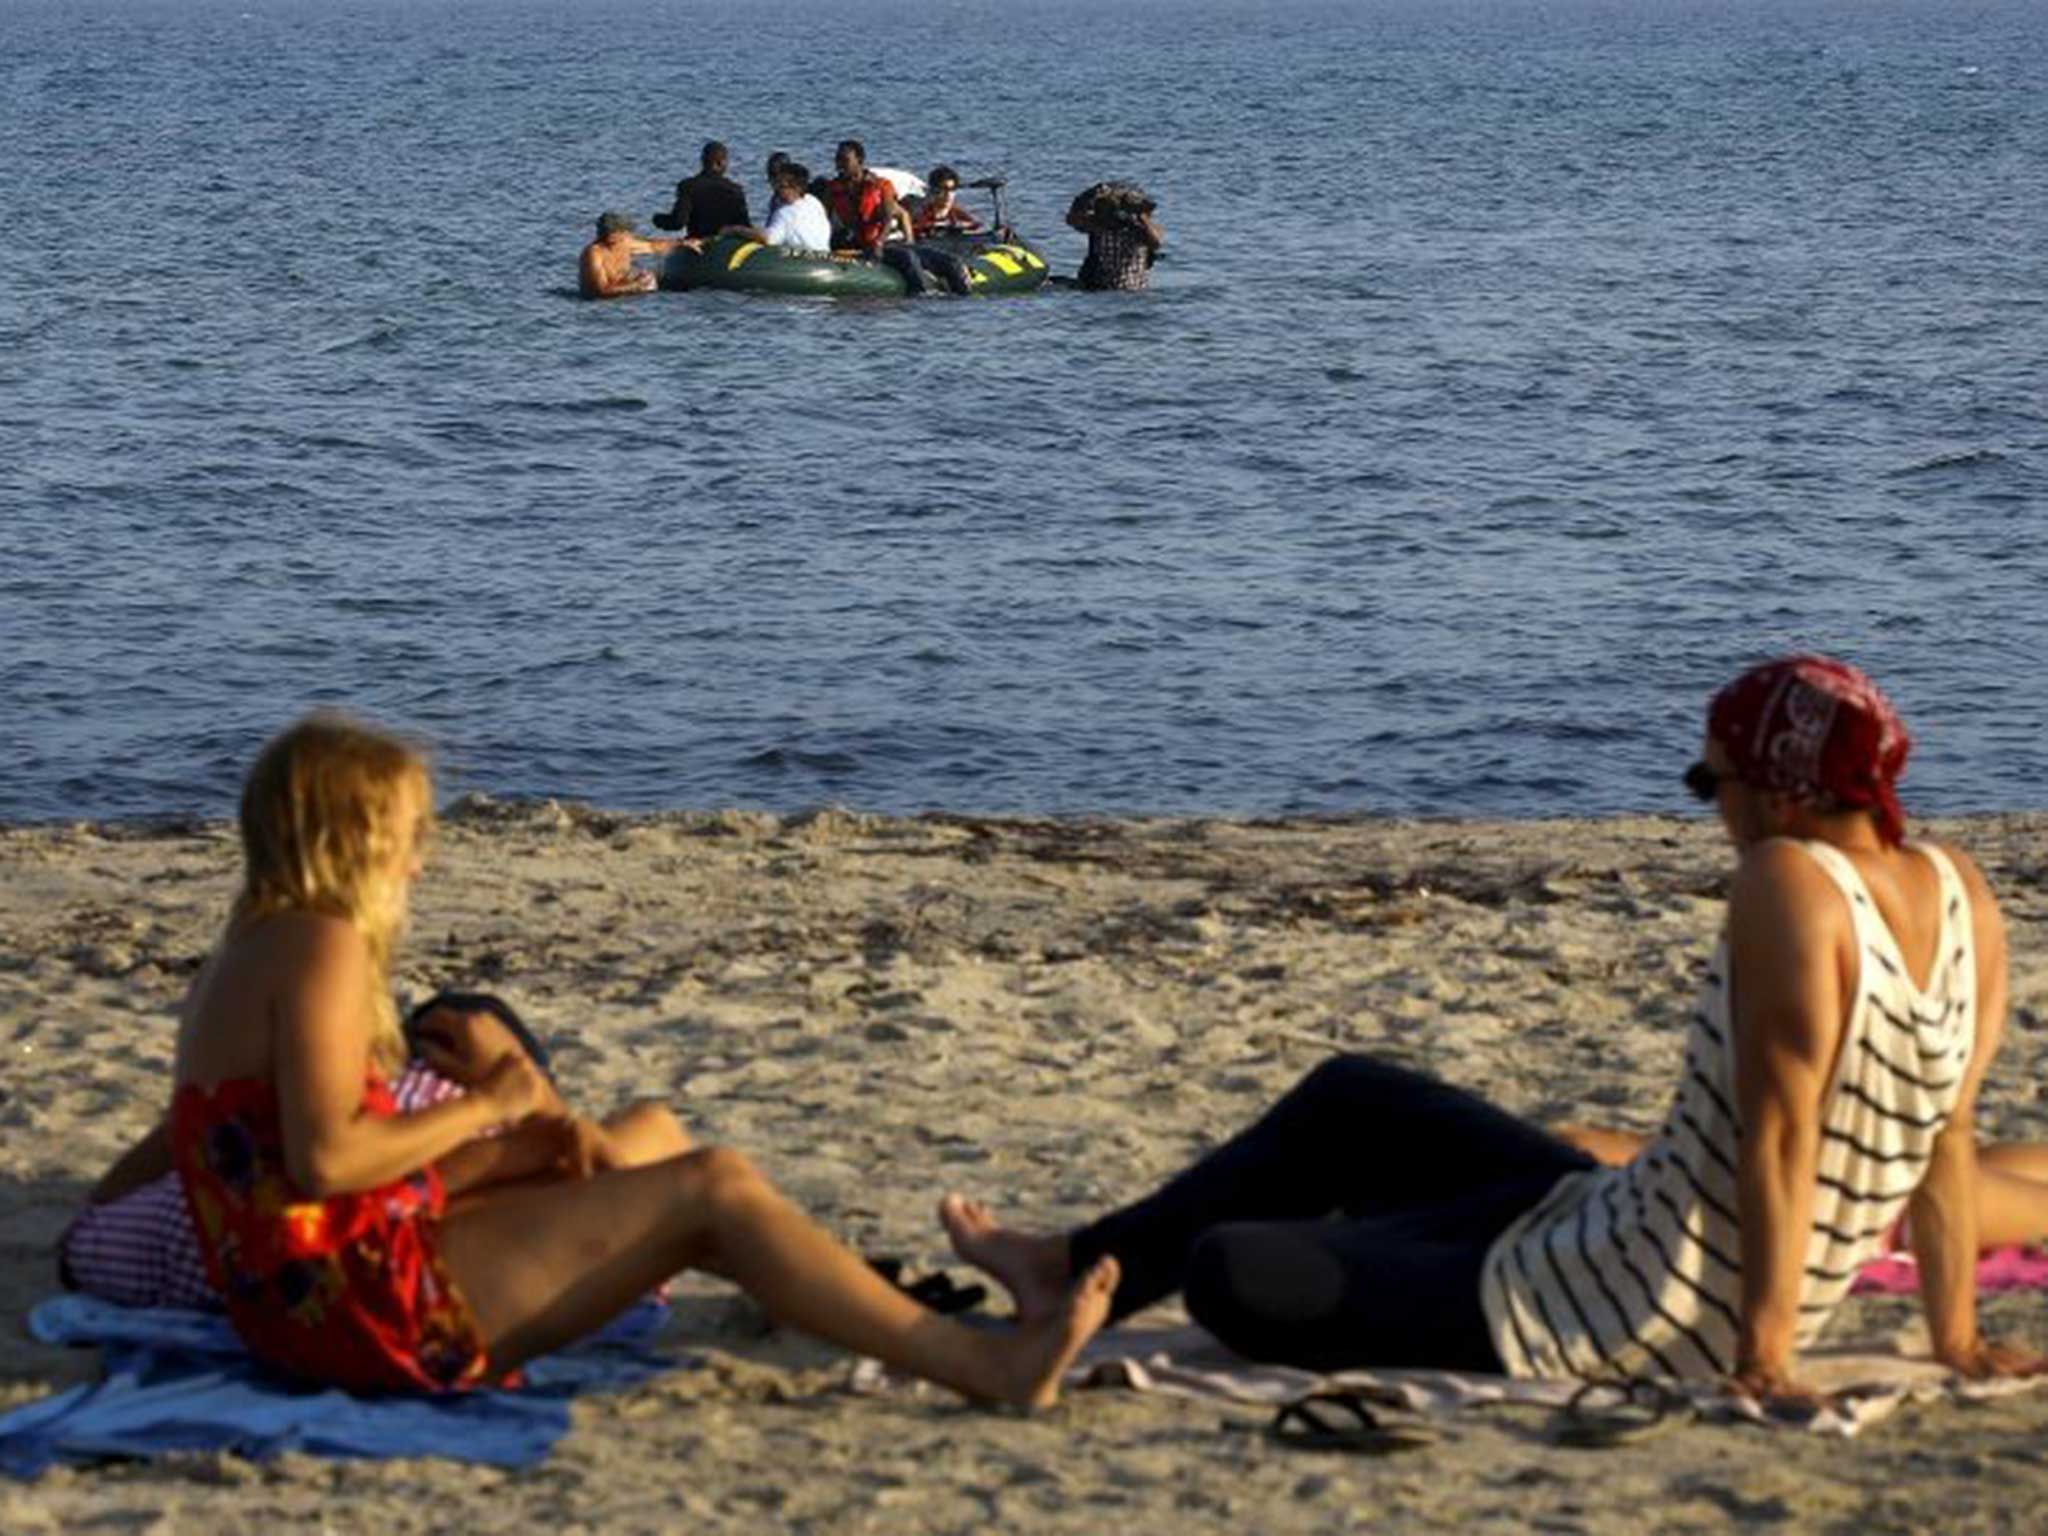 Tourists sunbathe on a beach in Kos as migrants struggle to the shore